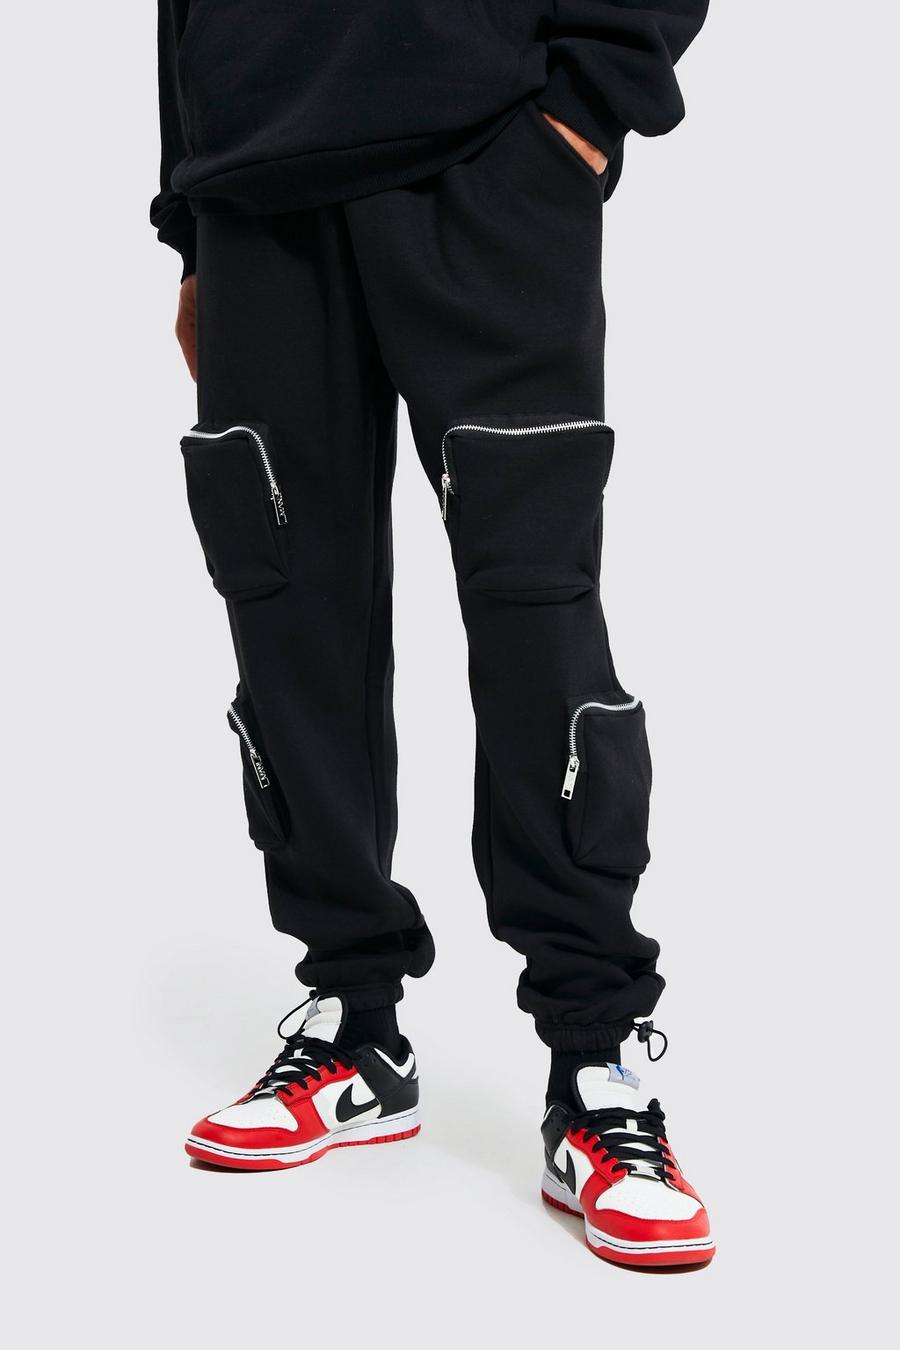 Black Tall Multi Pocket Cargo Jogger With Cuff image number 1